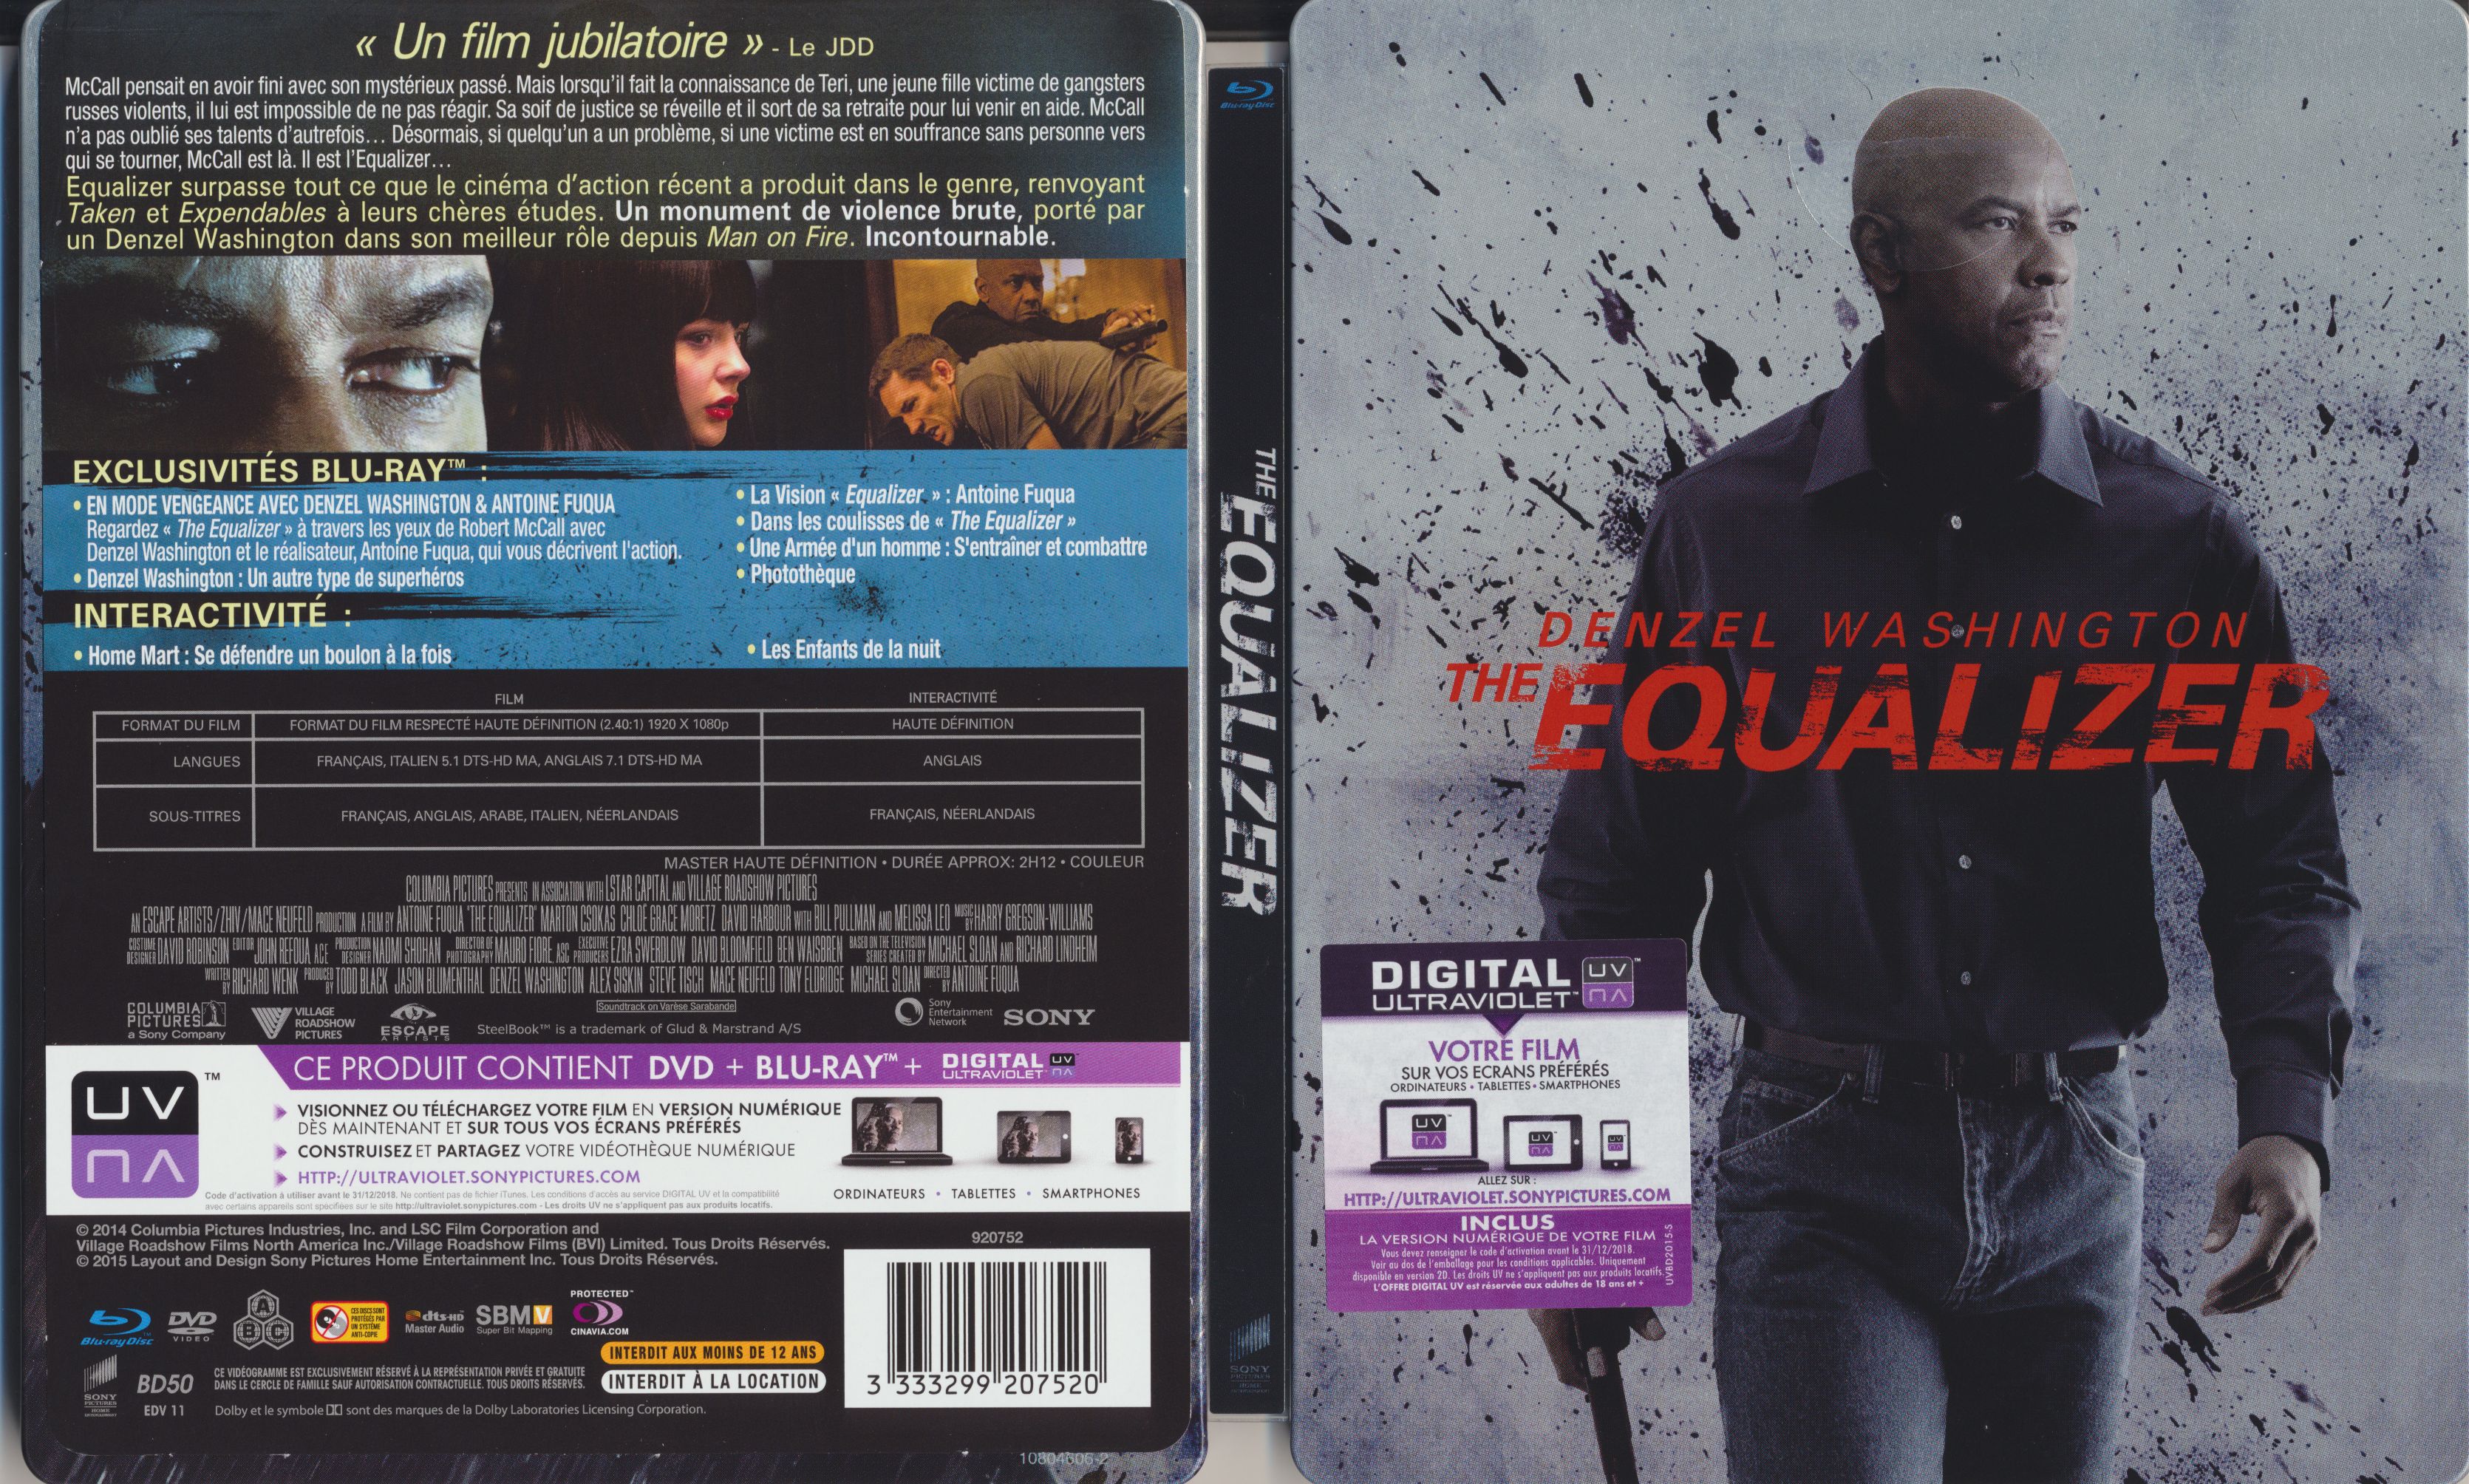 Jaquette DVD Equalizer (BLU-RAY)